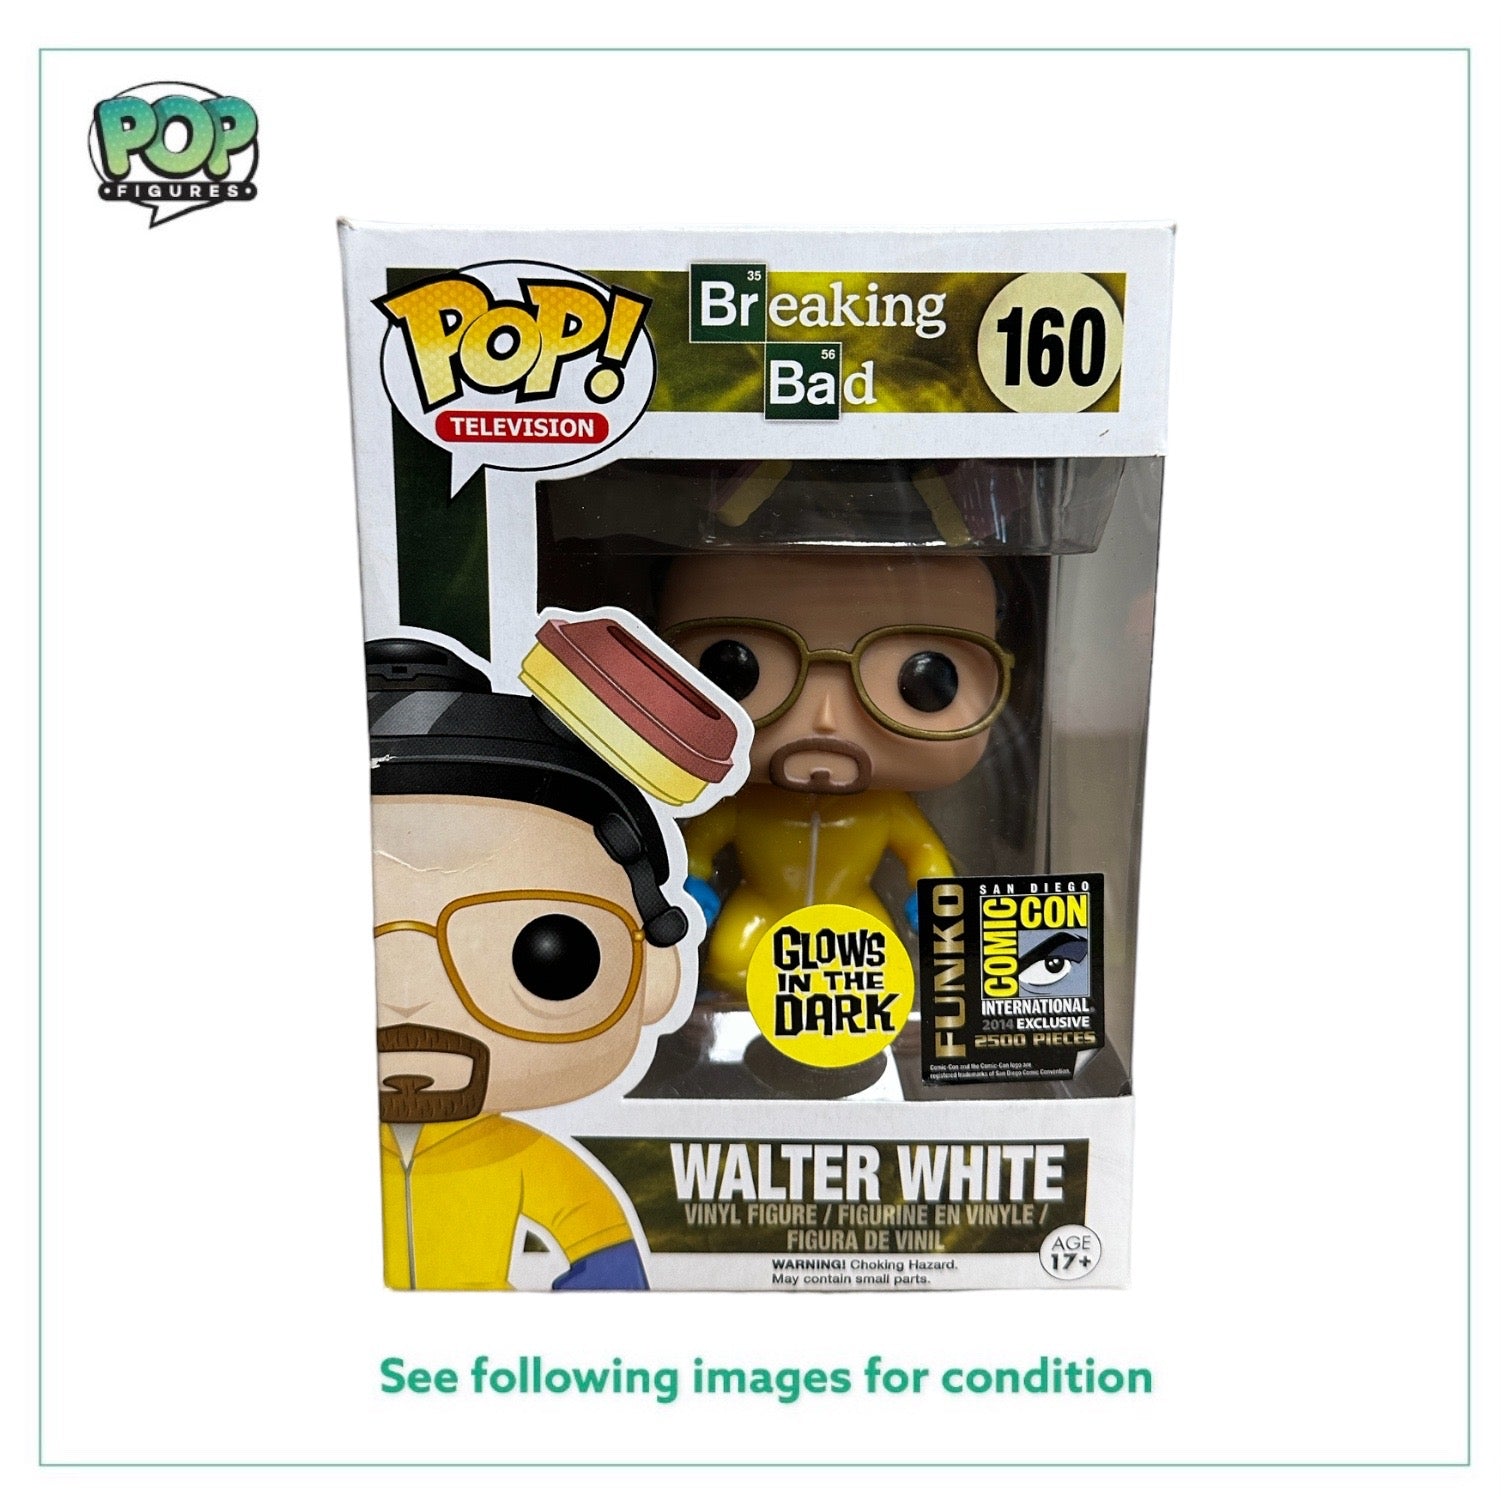 Walter White #160 (Glows in the Dark) Funko Pop! - Breaking Bad - SDCC 2014 Exclusive LE2500 Pcs - Condition 7/10